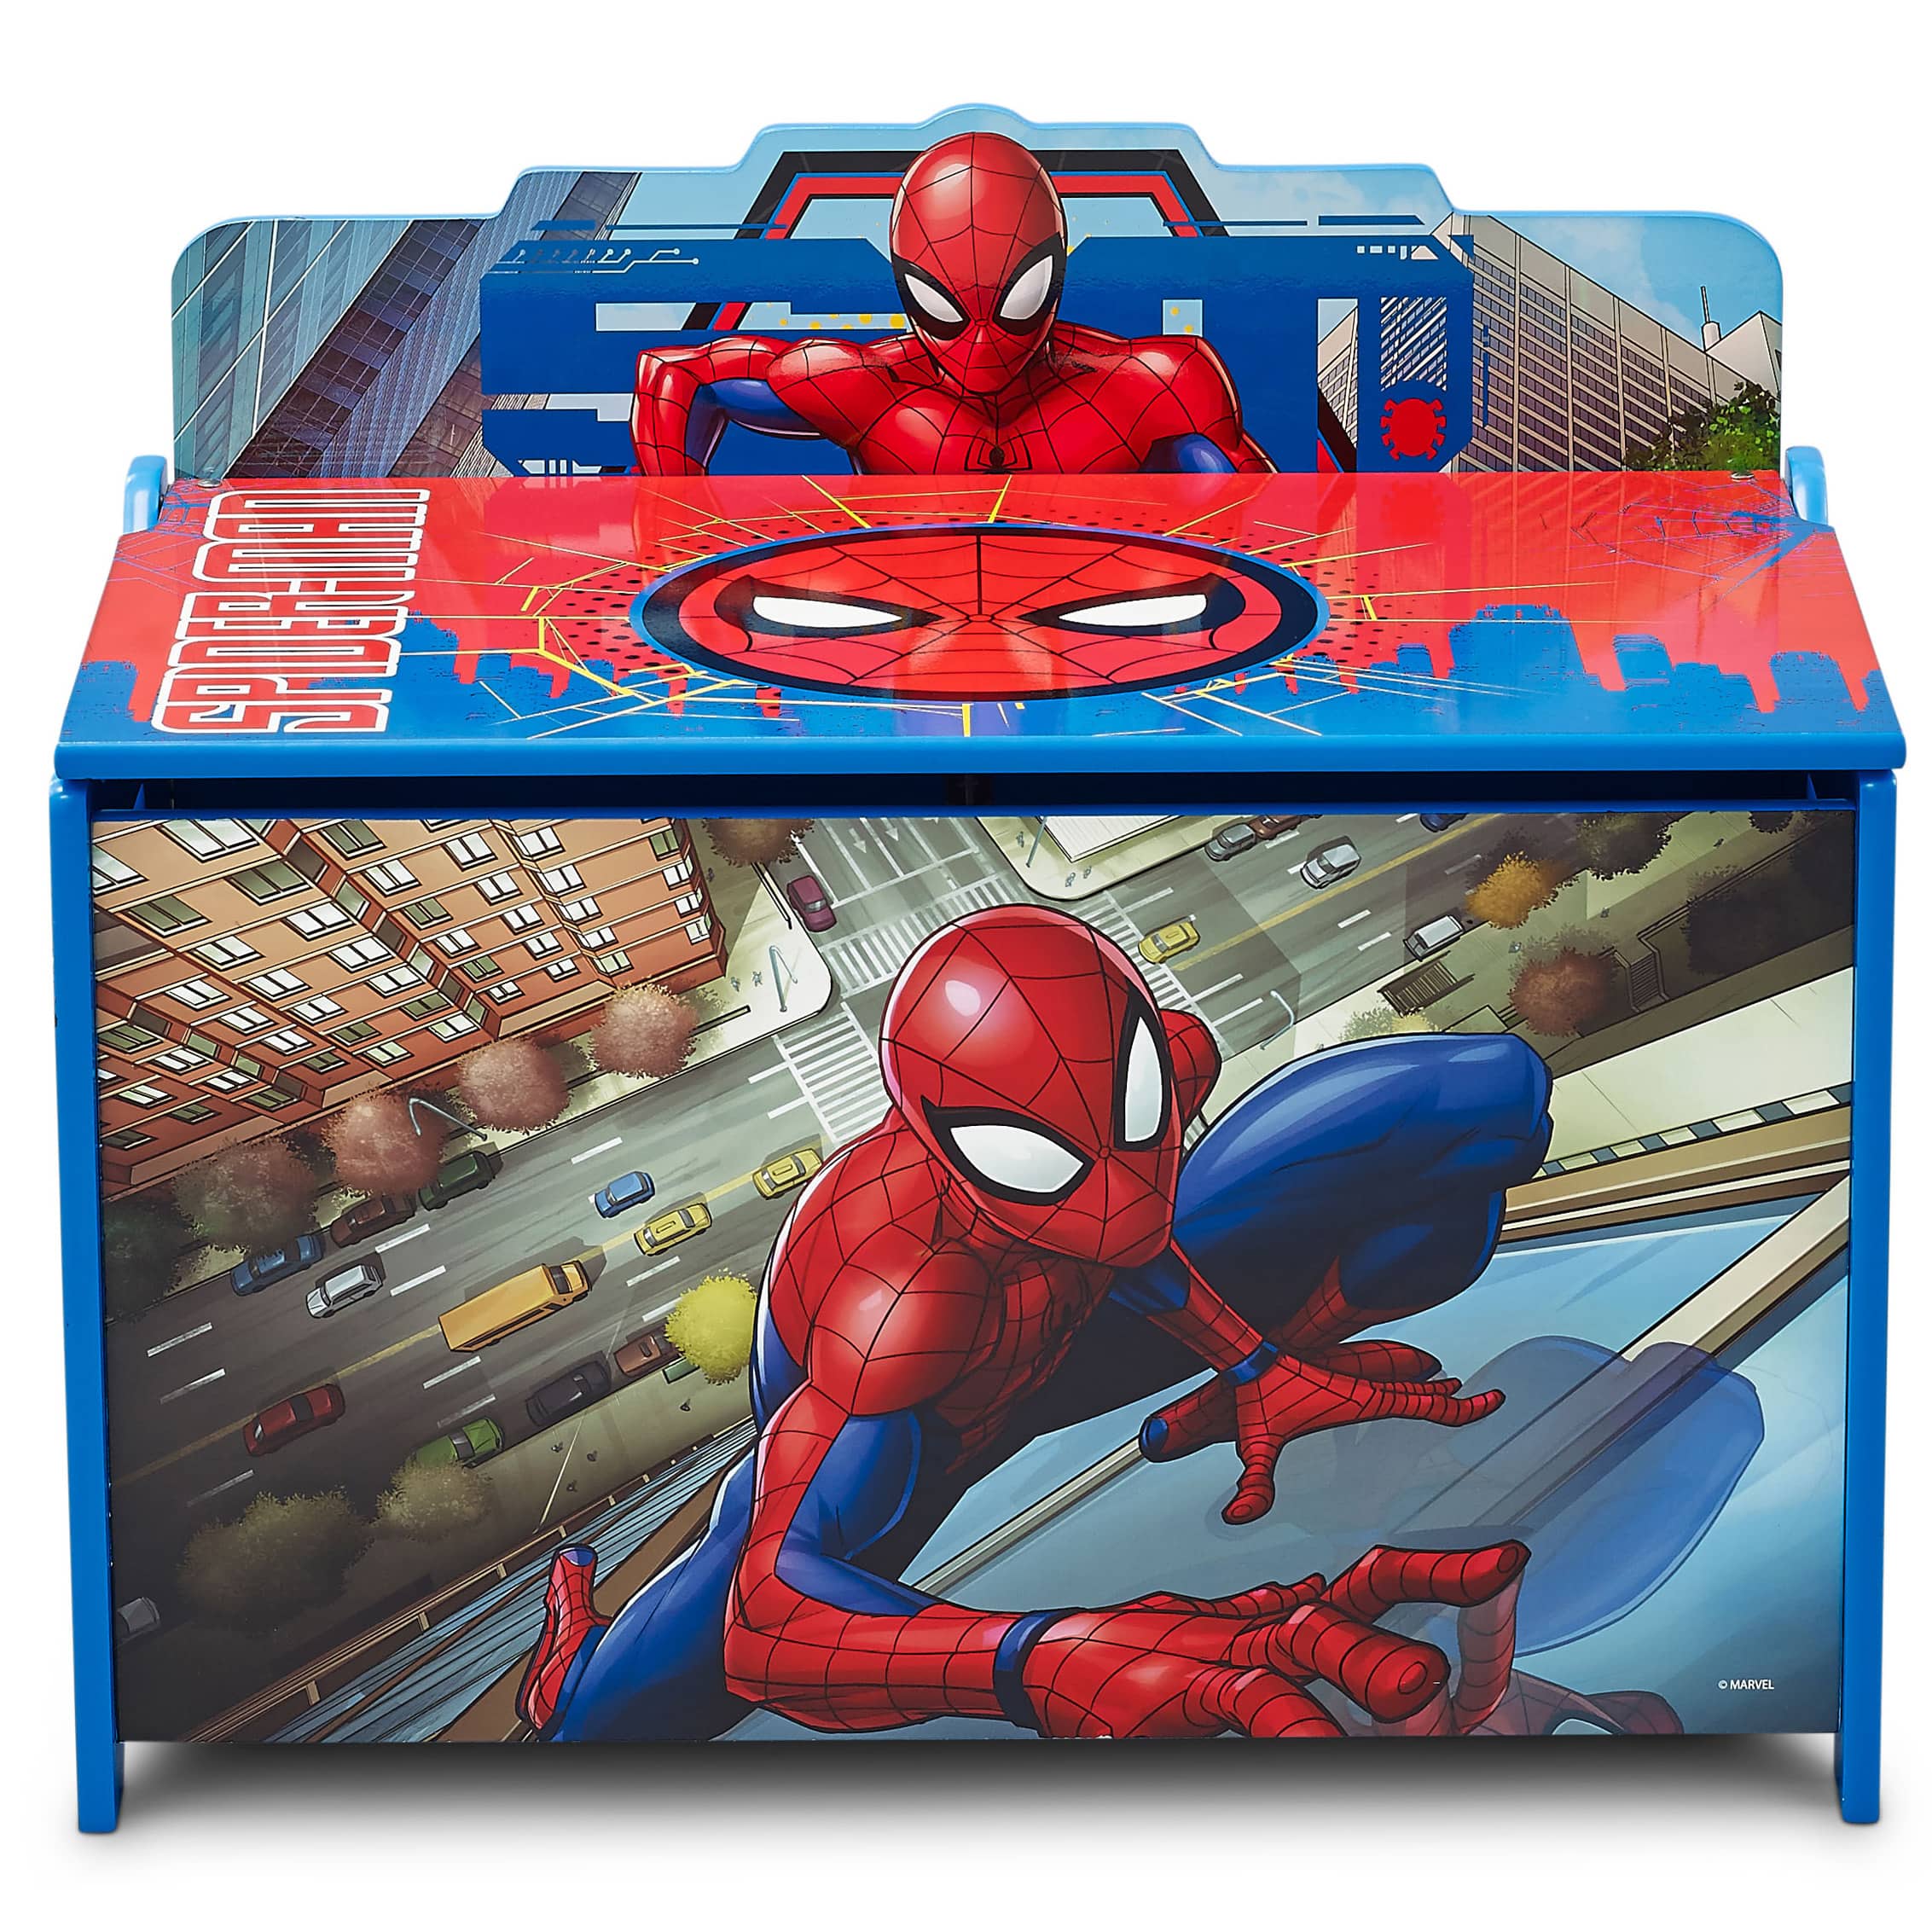 Spider-Man soap  MakerPlace by Michaels